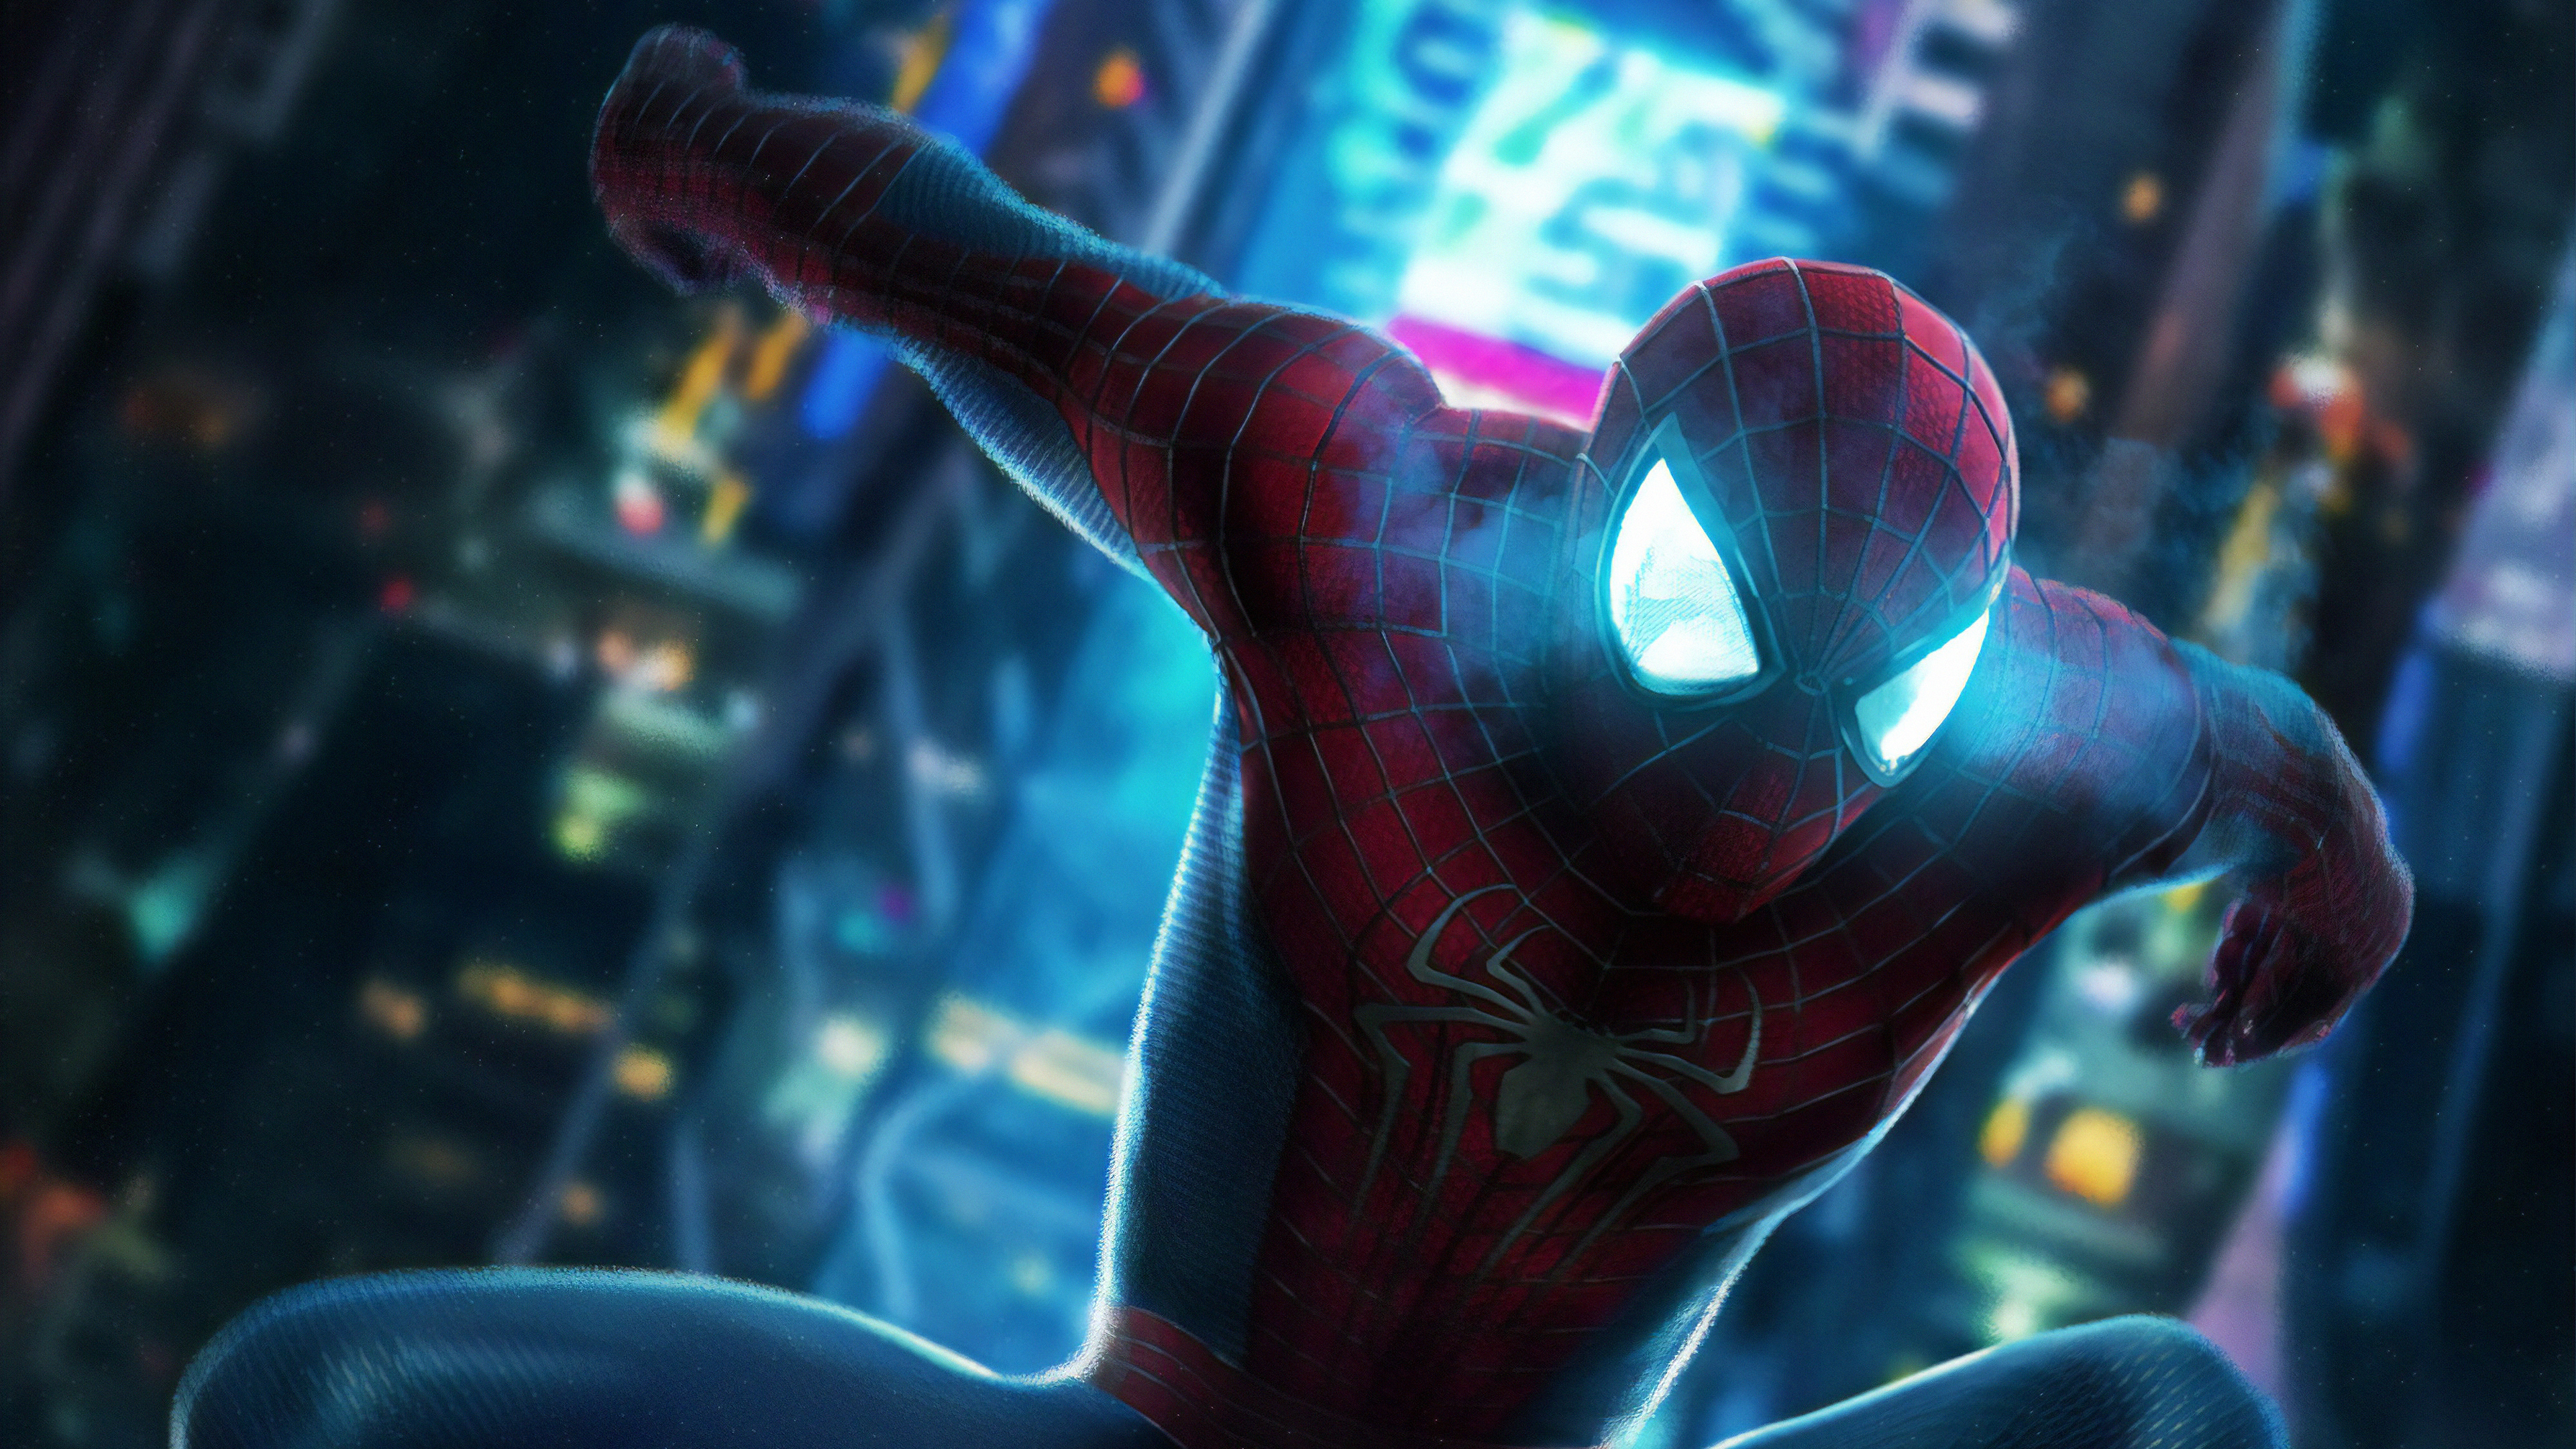 Spiderman blue eyes hd superheroes k wallpapers images backgrounds photos and pictures